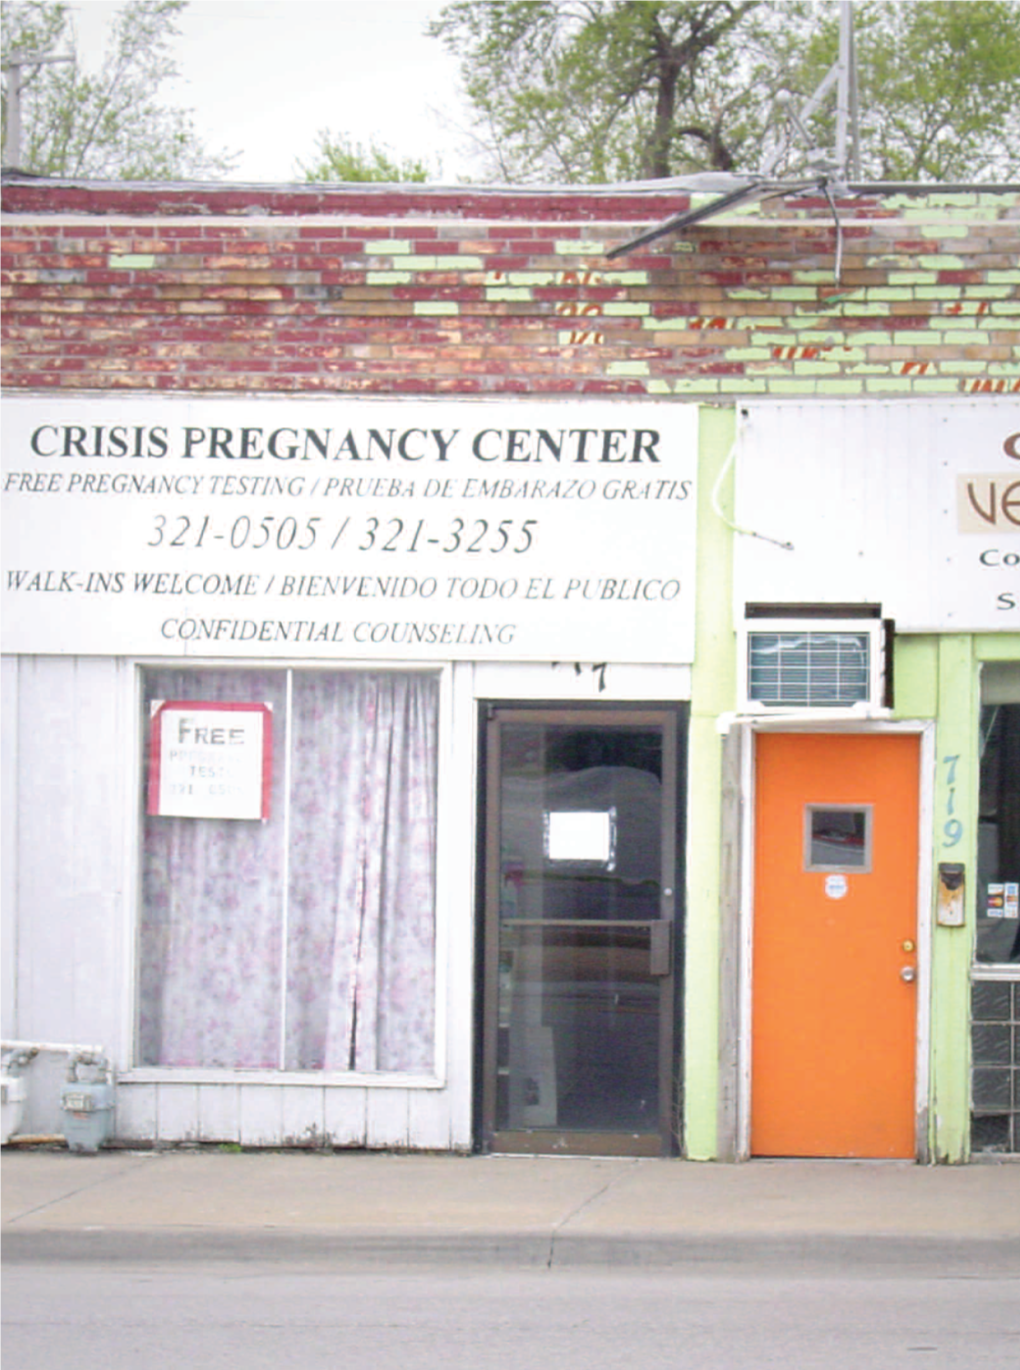 The Anti-Abortion Clinic Across the Street